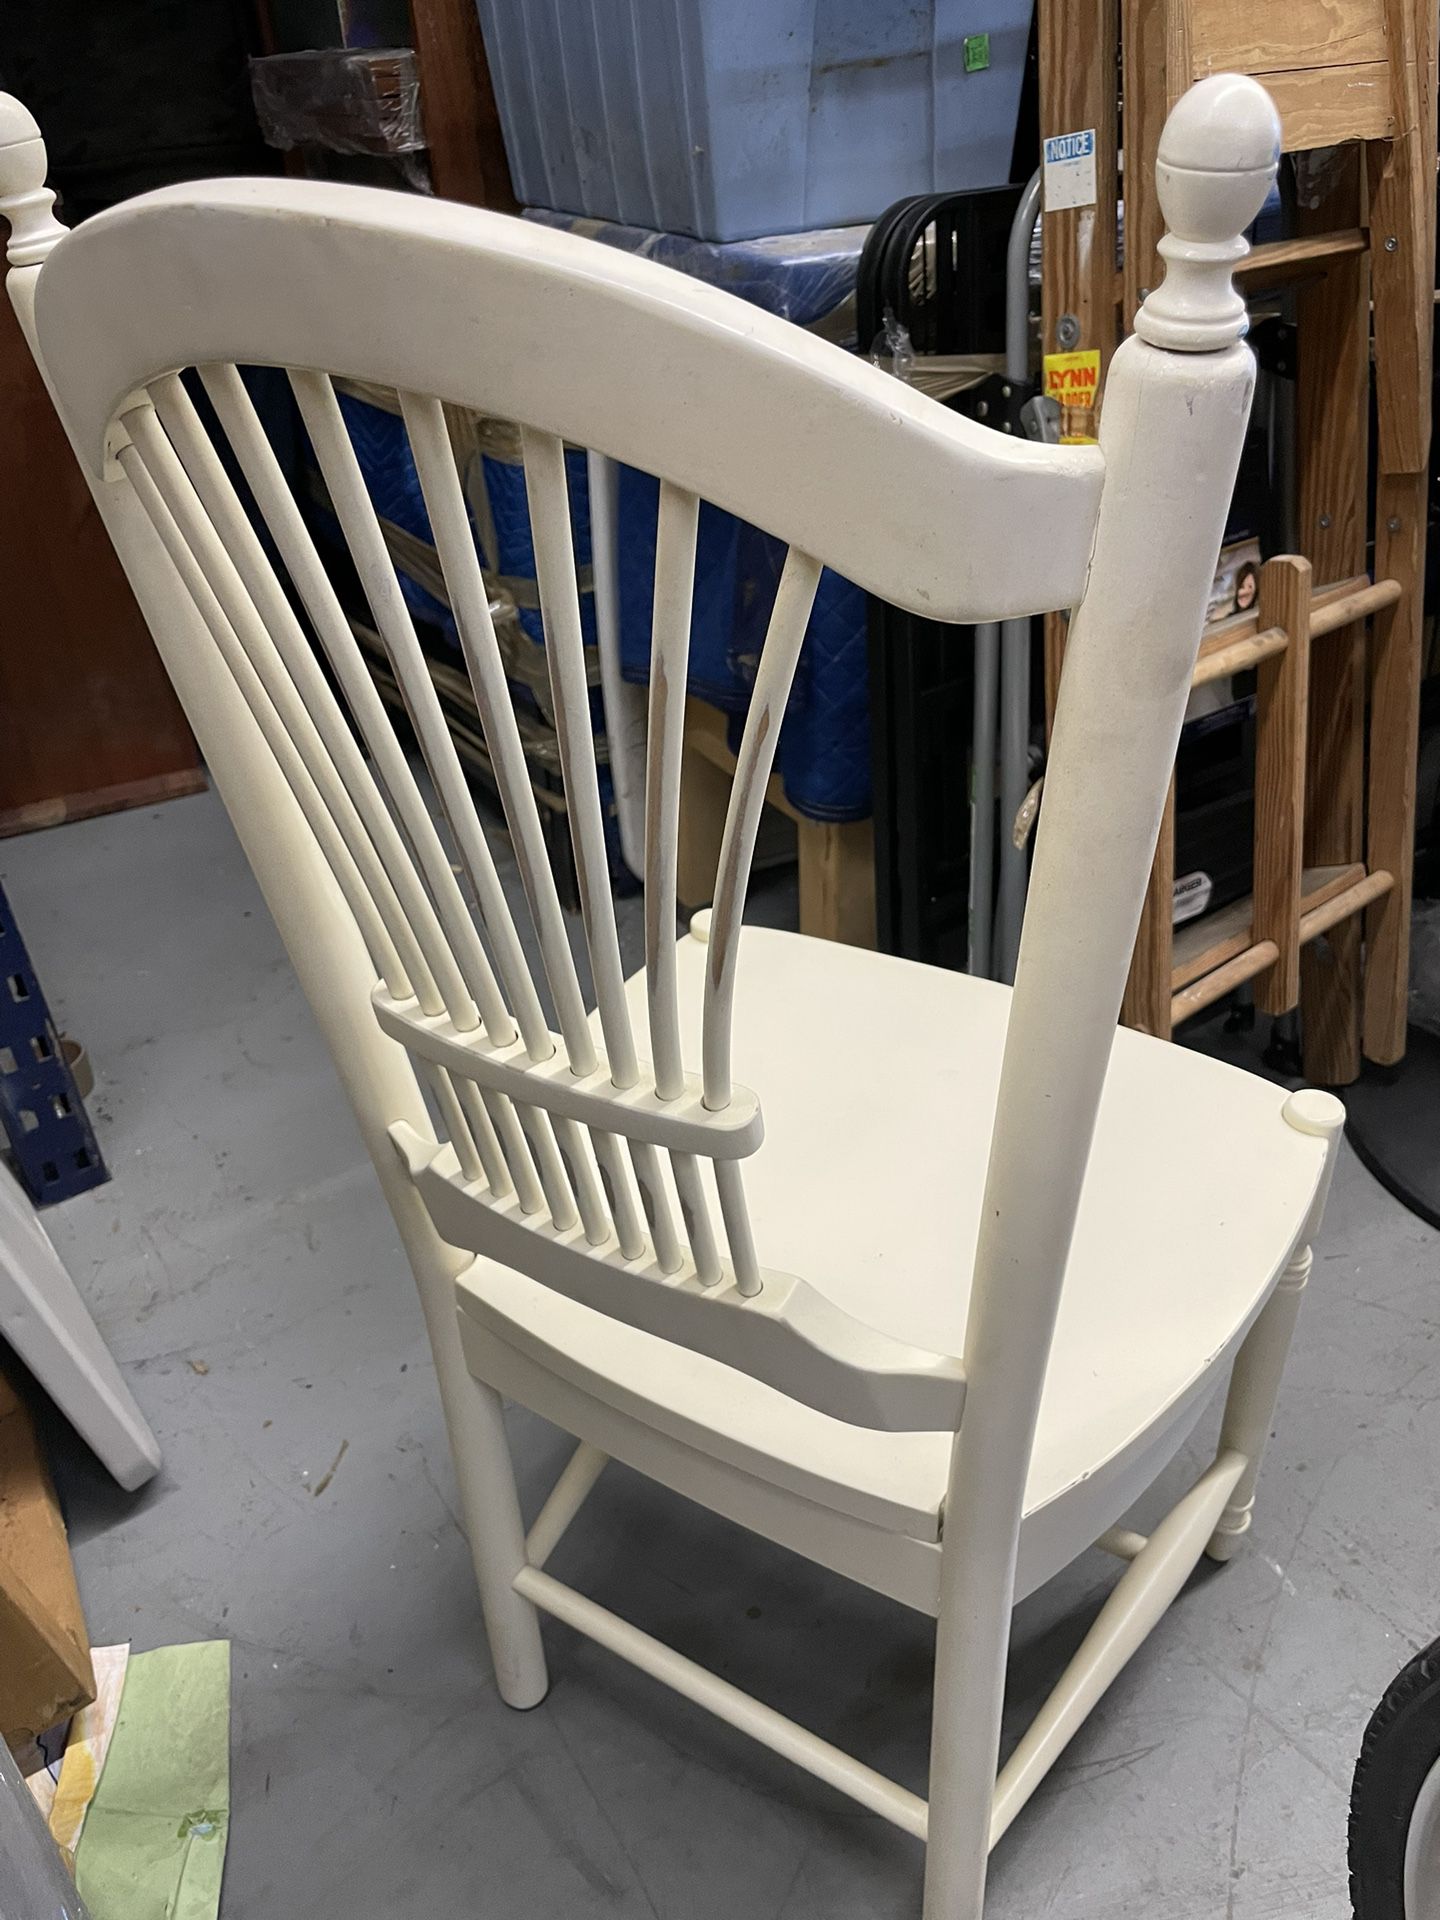 Many Chairs For Sale Price Between 20-40 Each 